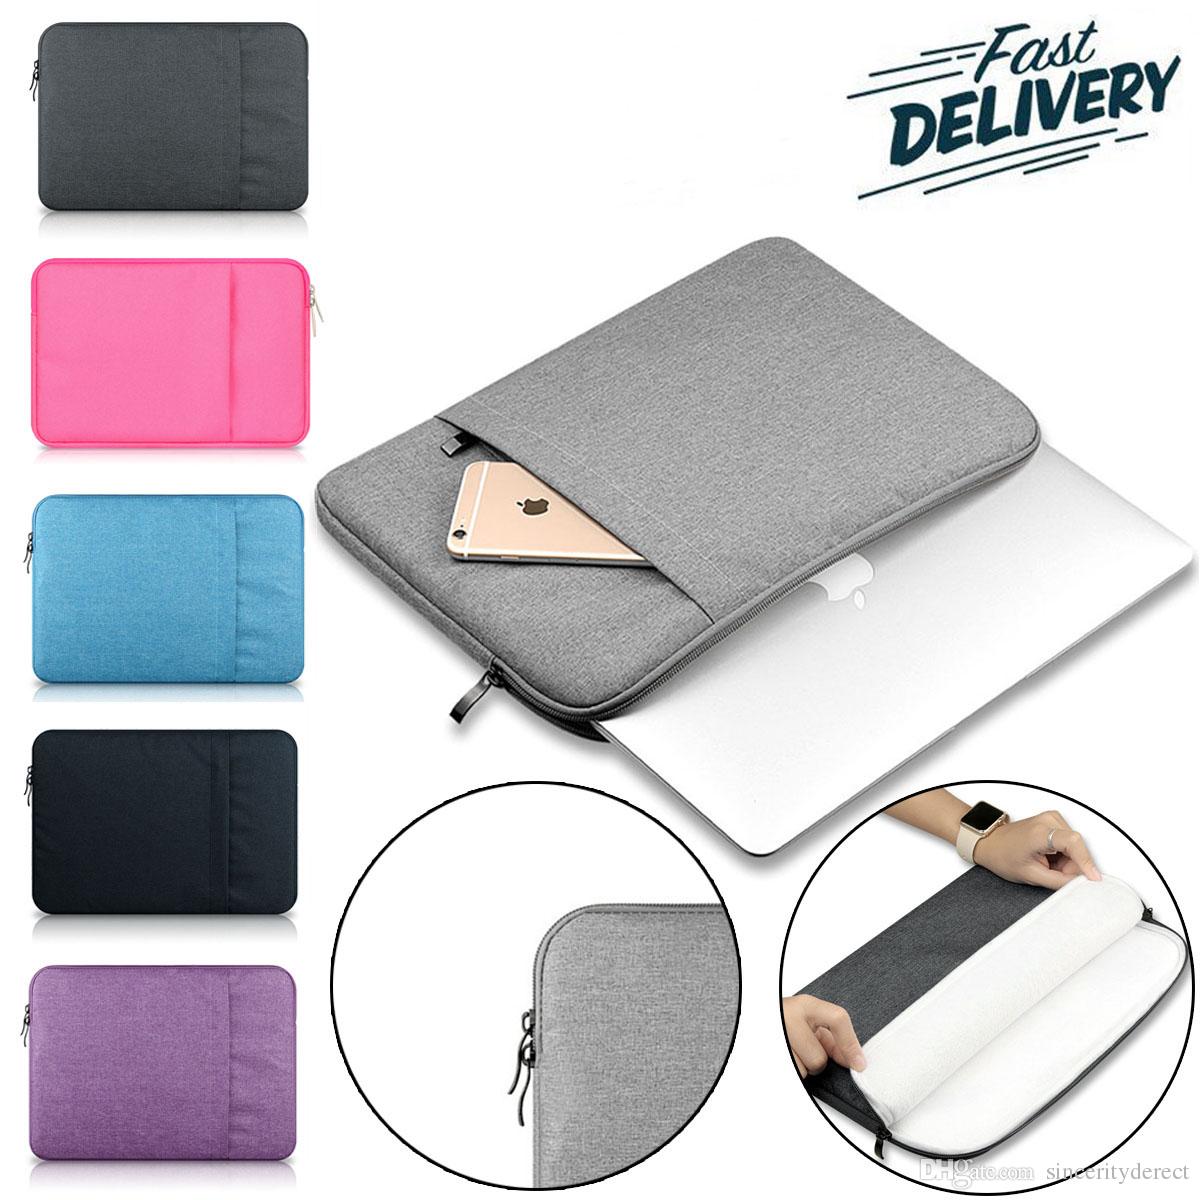 Laptop Sleeve Drop-proof Dust for 13-15 inch Notebook Bag For iPad Pro Apple ASUS Lenovo Dell,Portable 360° Protective Carrying Case Bag